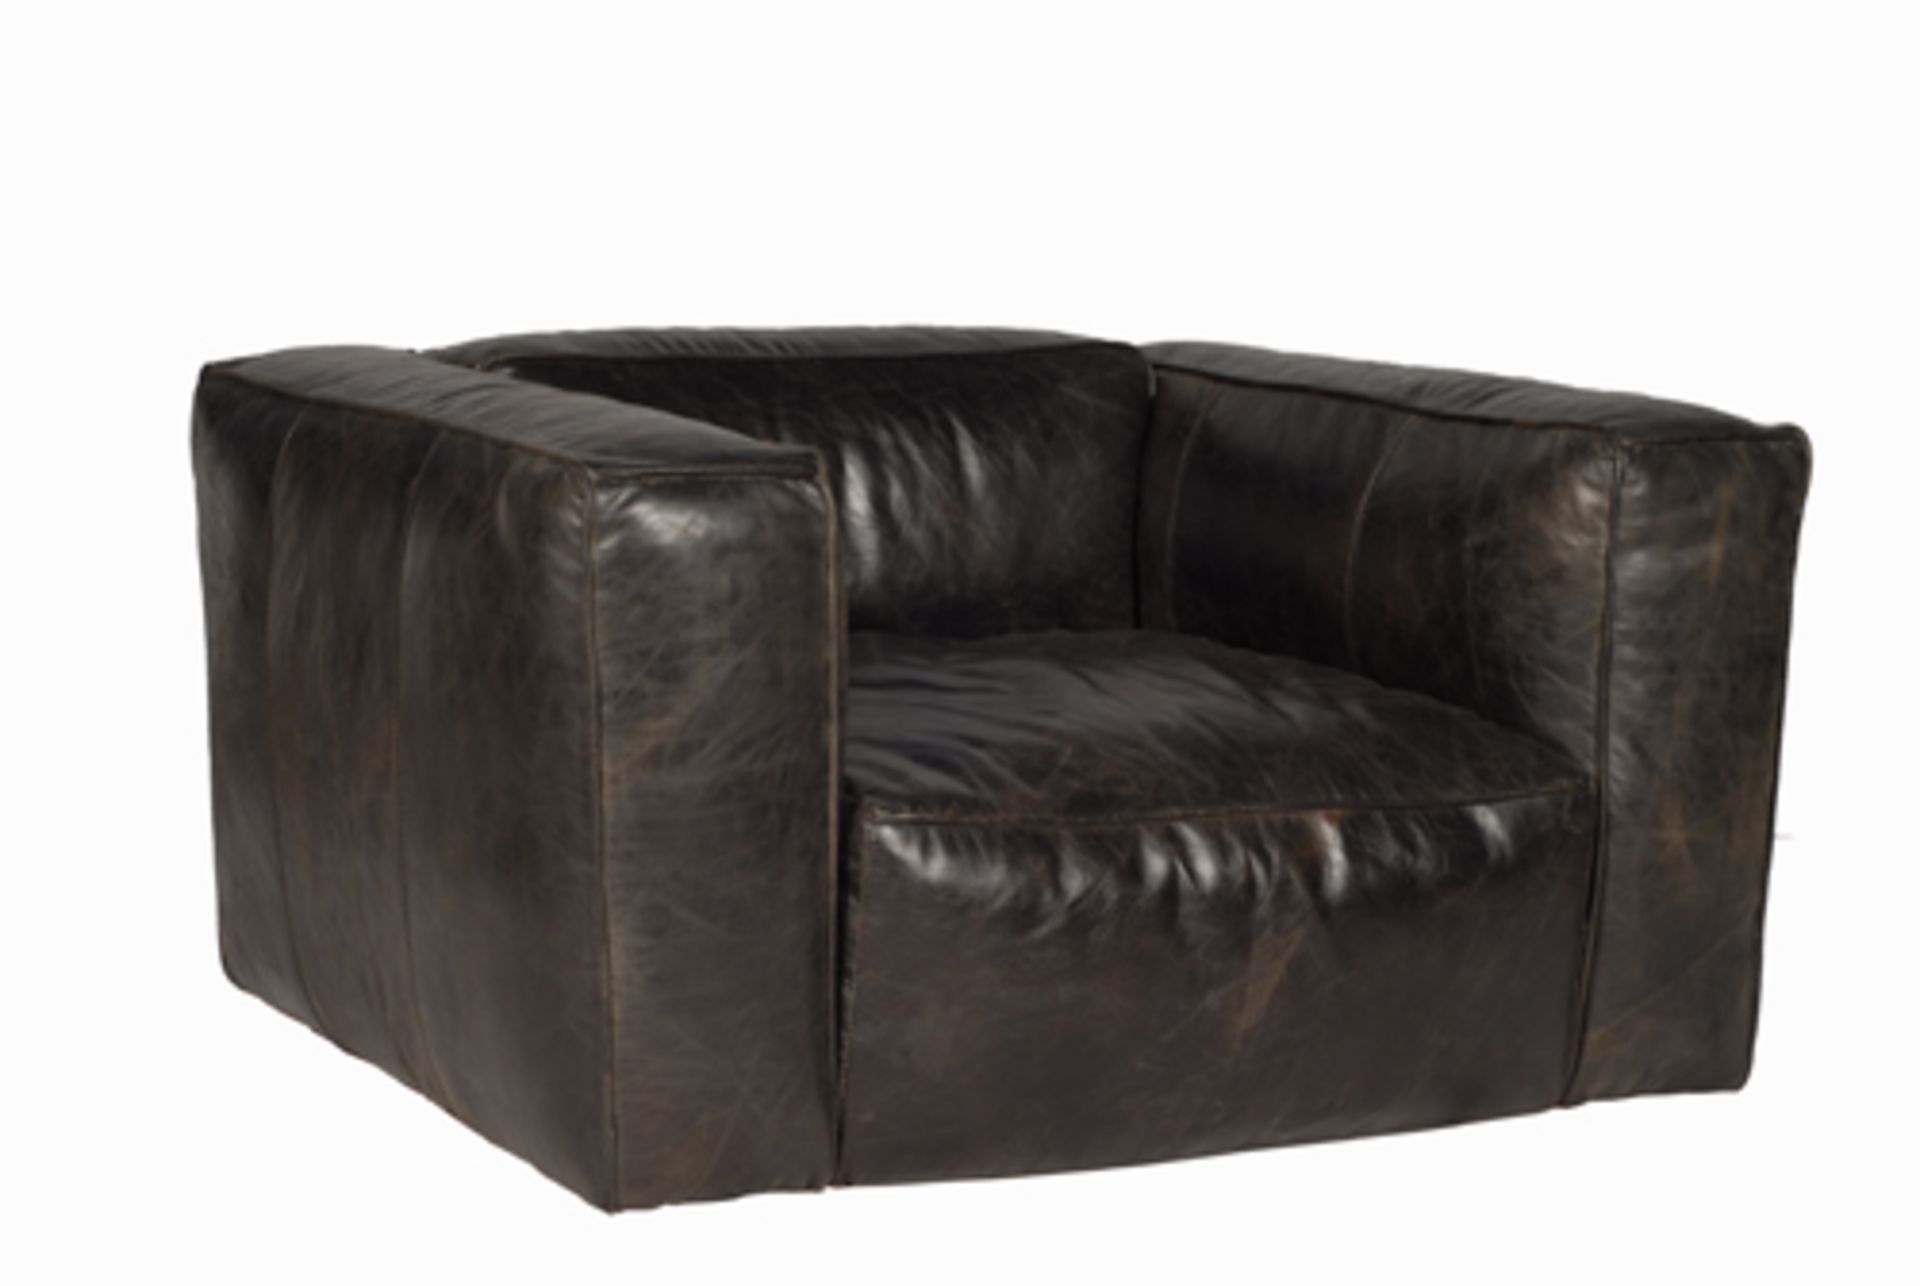 Tribeca Sofa Single Seater Collection Offers Well-Mannered Style Featuring The Natural Tones Of